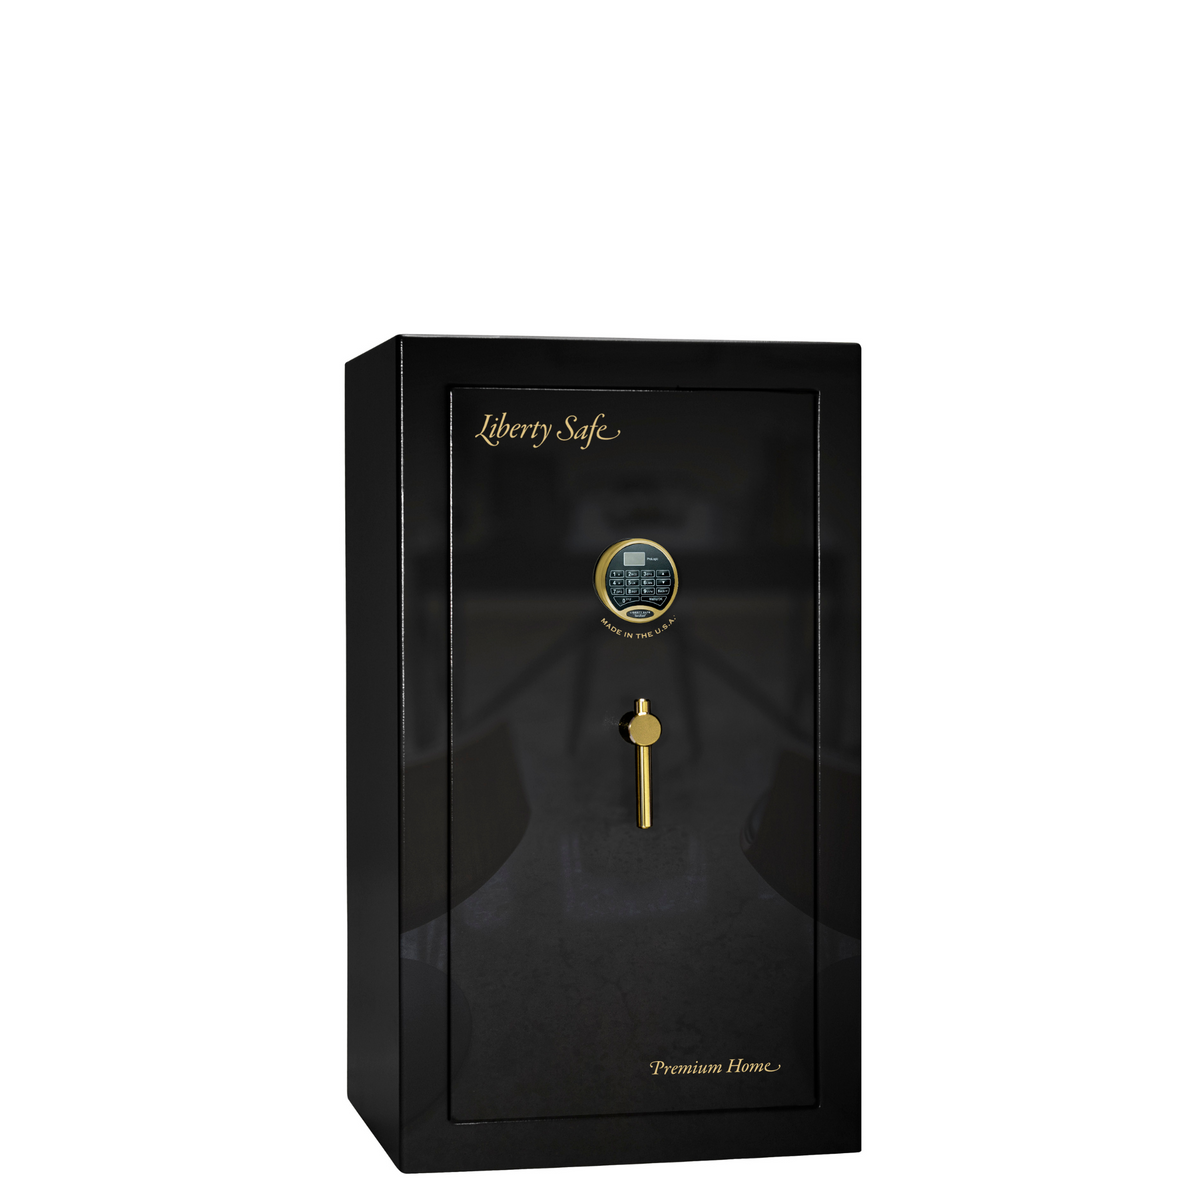 Premium Home Series | Level 7 Security | 2 Hour Fire Protection | 12 | Dimensions: 41.75&quot;(H) x 24.5&quot;(W) x 19&quot;(D) | Black Gloss Brass - Closed  Door